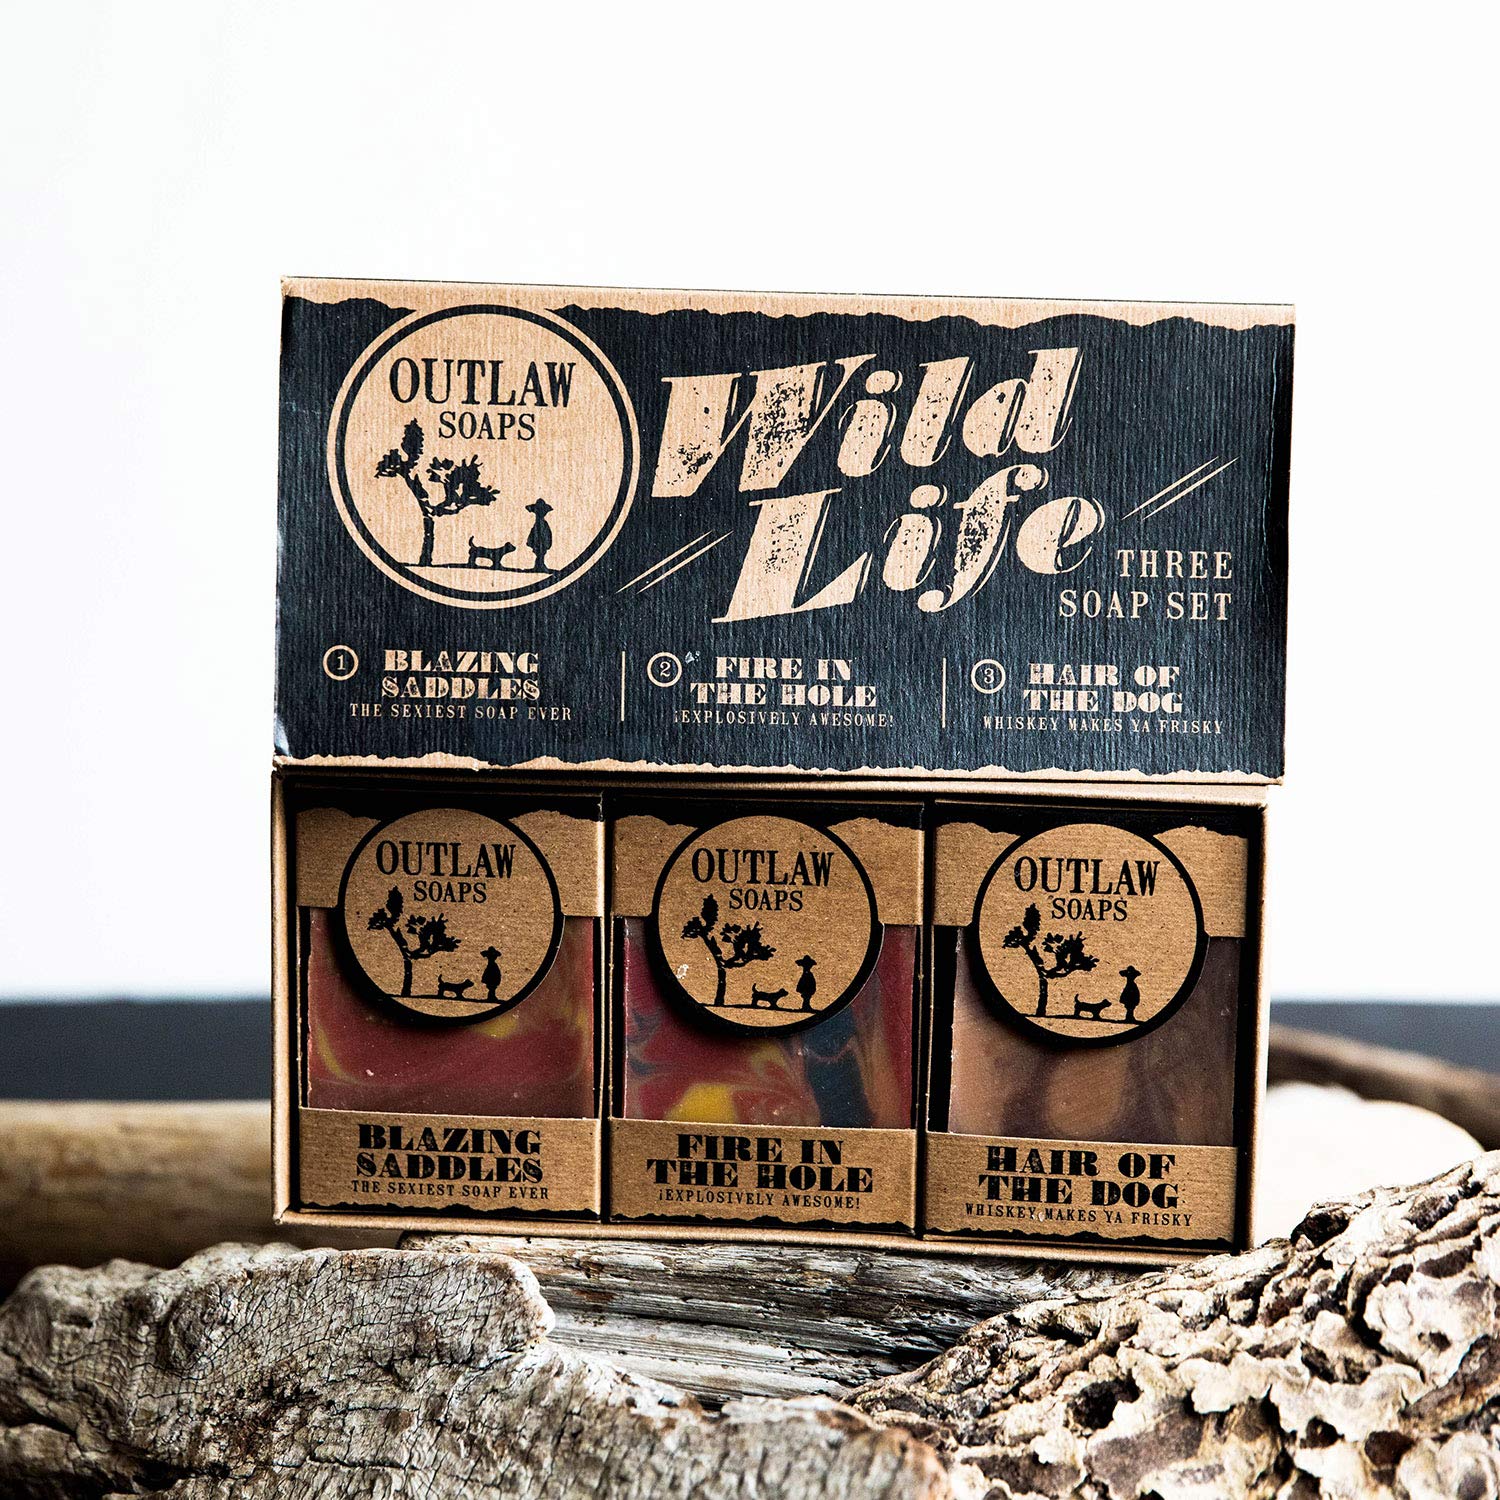 Outlaw Wild Life Homemade Natural Soap Gift Set - 3 Western-style Handmade Soaps in a Rustic Gift Box - The Ideal Gift for the Wild West Lover in your Life (Who Also Enjoys Being Clean)